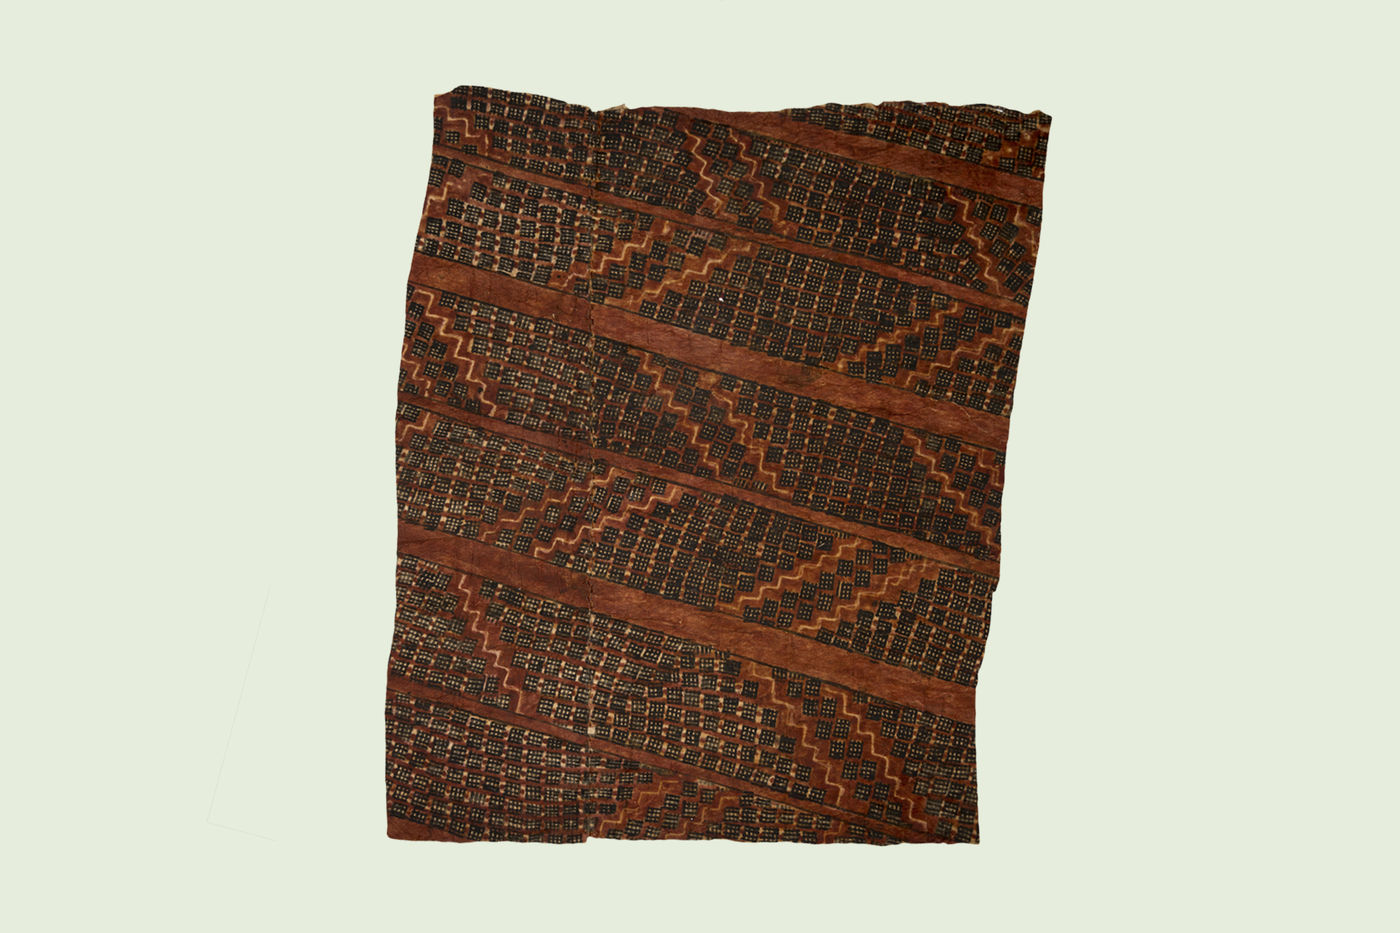 Tapa cloth is made from the inner bark of the paper mulberry tree that is processed into thin and flexible sheets. Usually decorated with patterns, tapa has been used for thousands of years for many purposes including clothing, blankets, and masks.